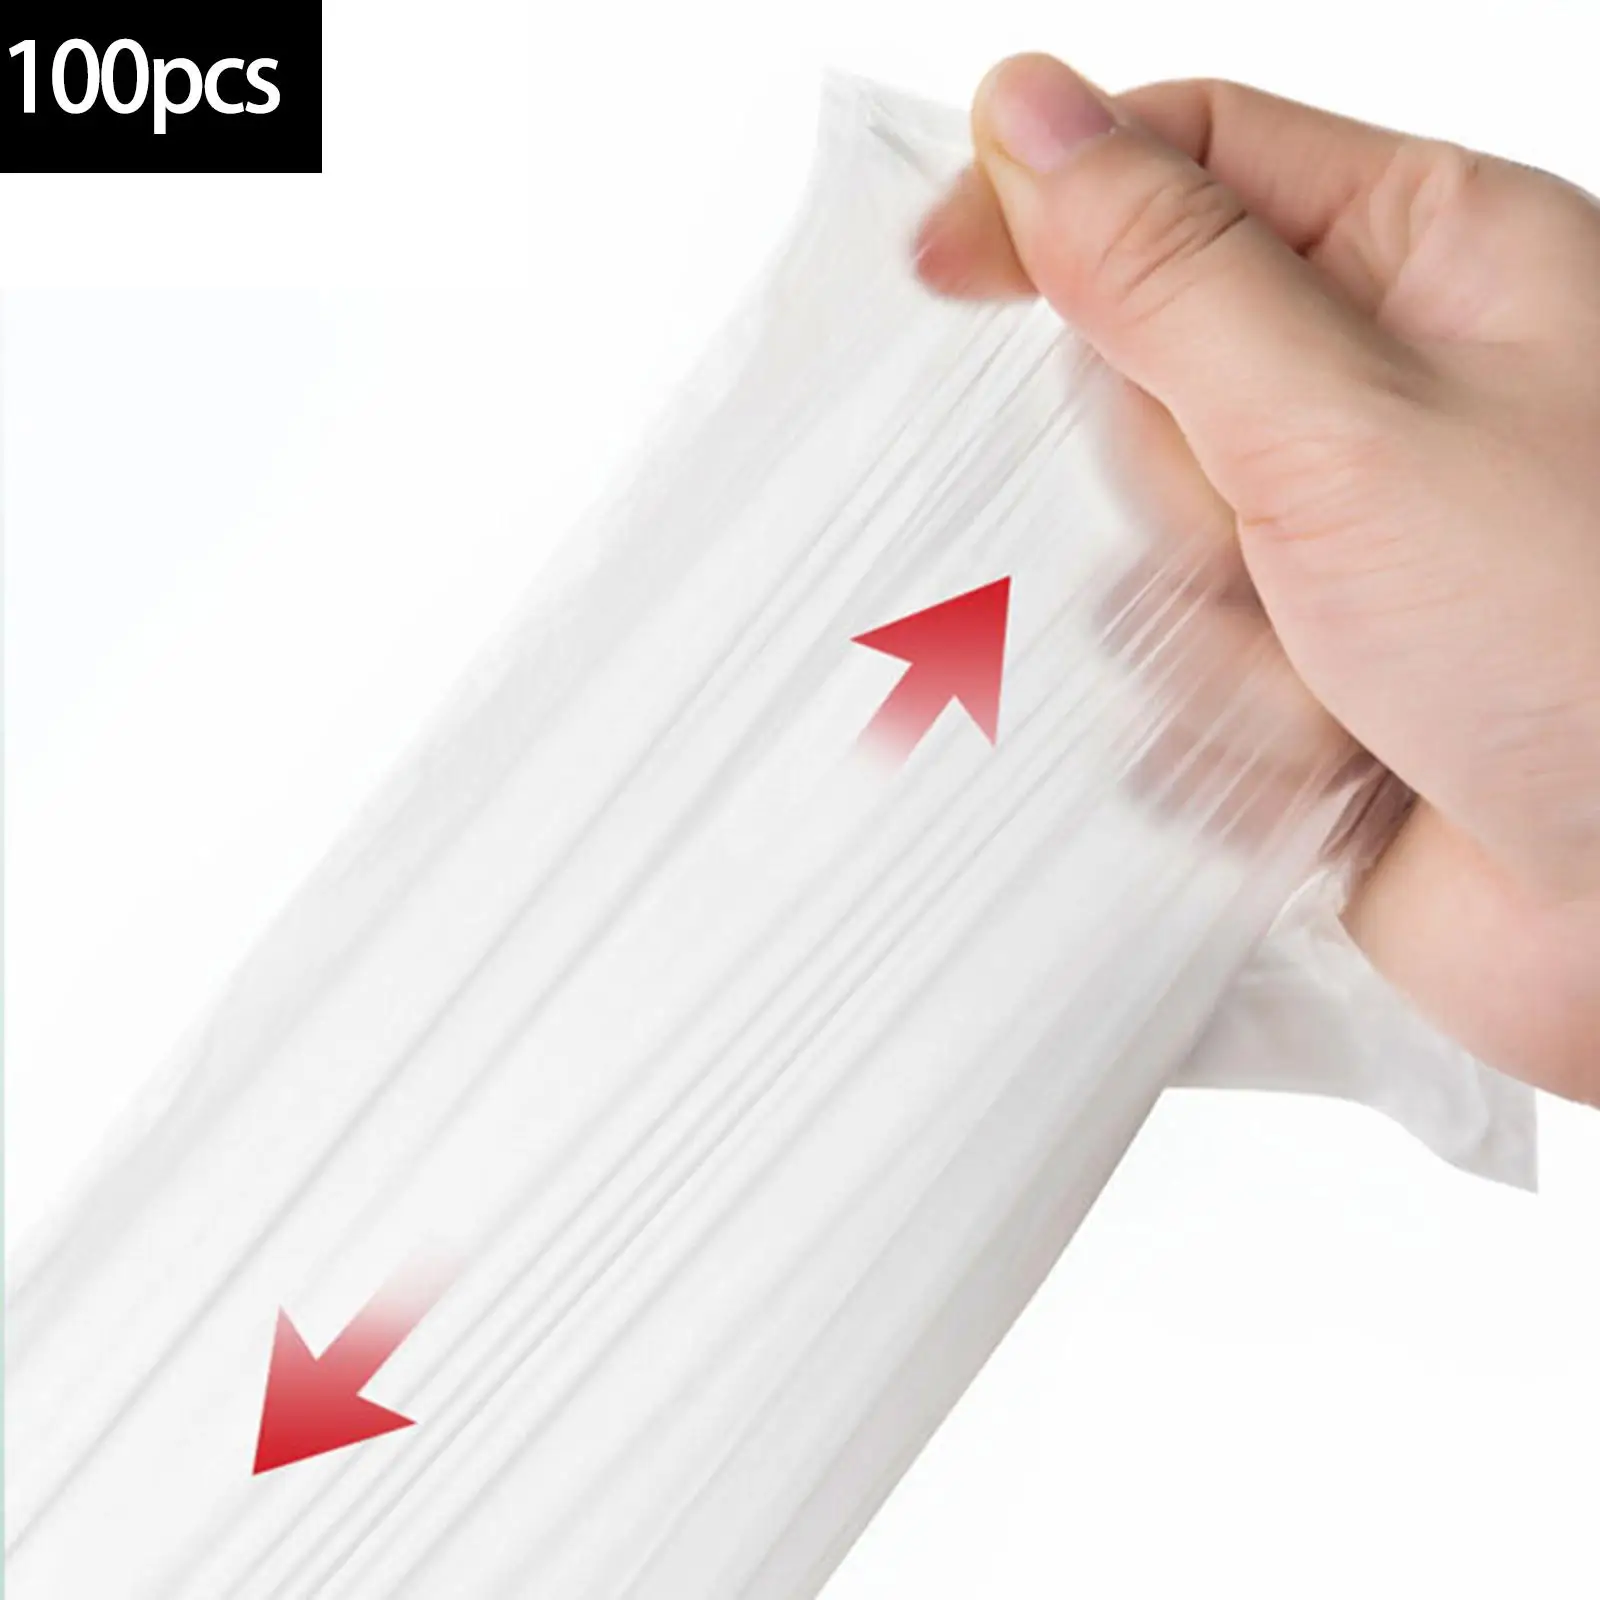 Set of 100Pcs Toilet Cleaning Bag with Drawstring for Kids, Lightweight